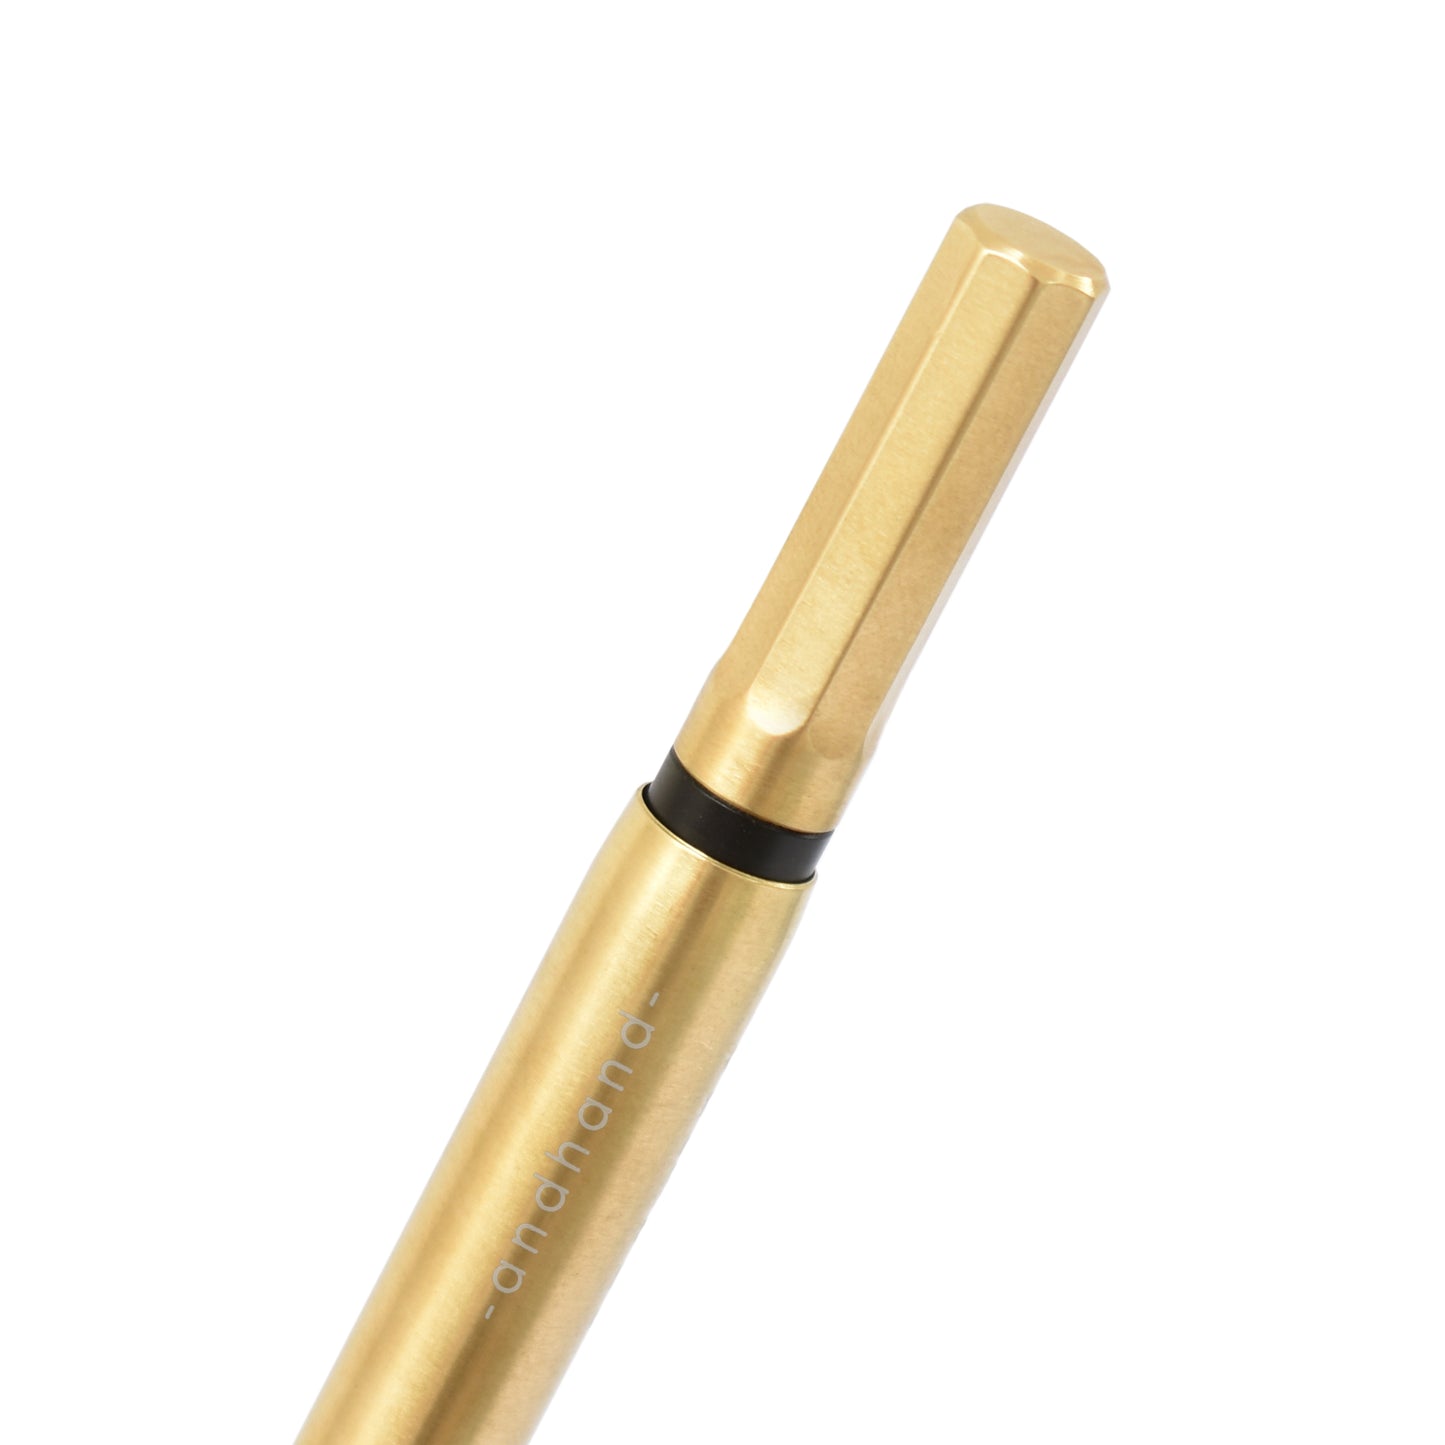 Method Pen Mini detail view, solid brass mini pen by Andhand. 4 inch pen